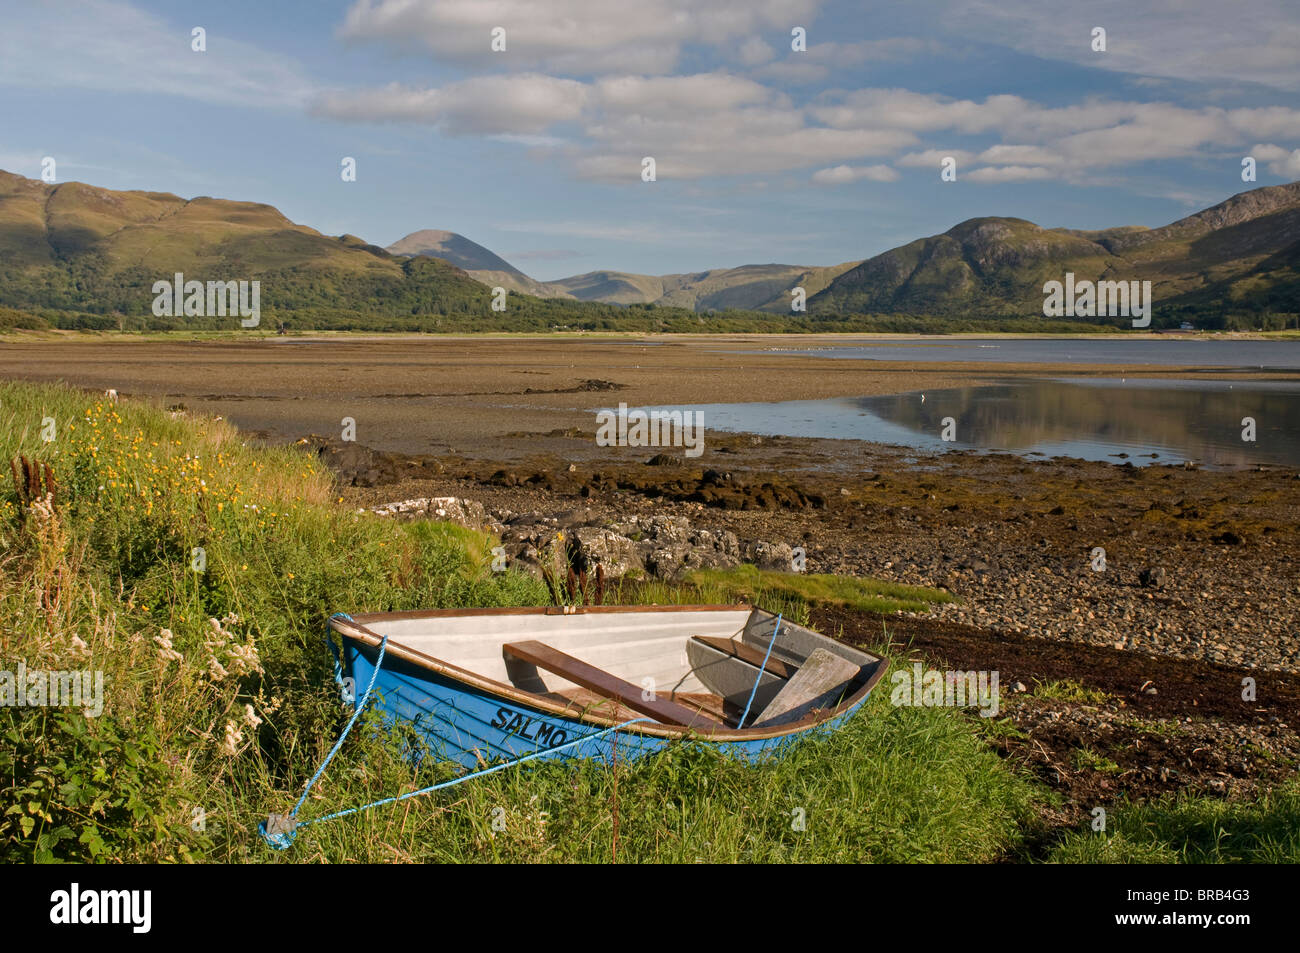 Low Tide on Loch na Keal on the Isle of Mull, Argyll and Bute, Strathclyde, Scotland.   SCO 6694 Stock Photo